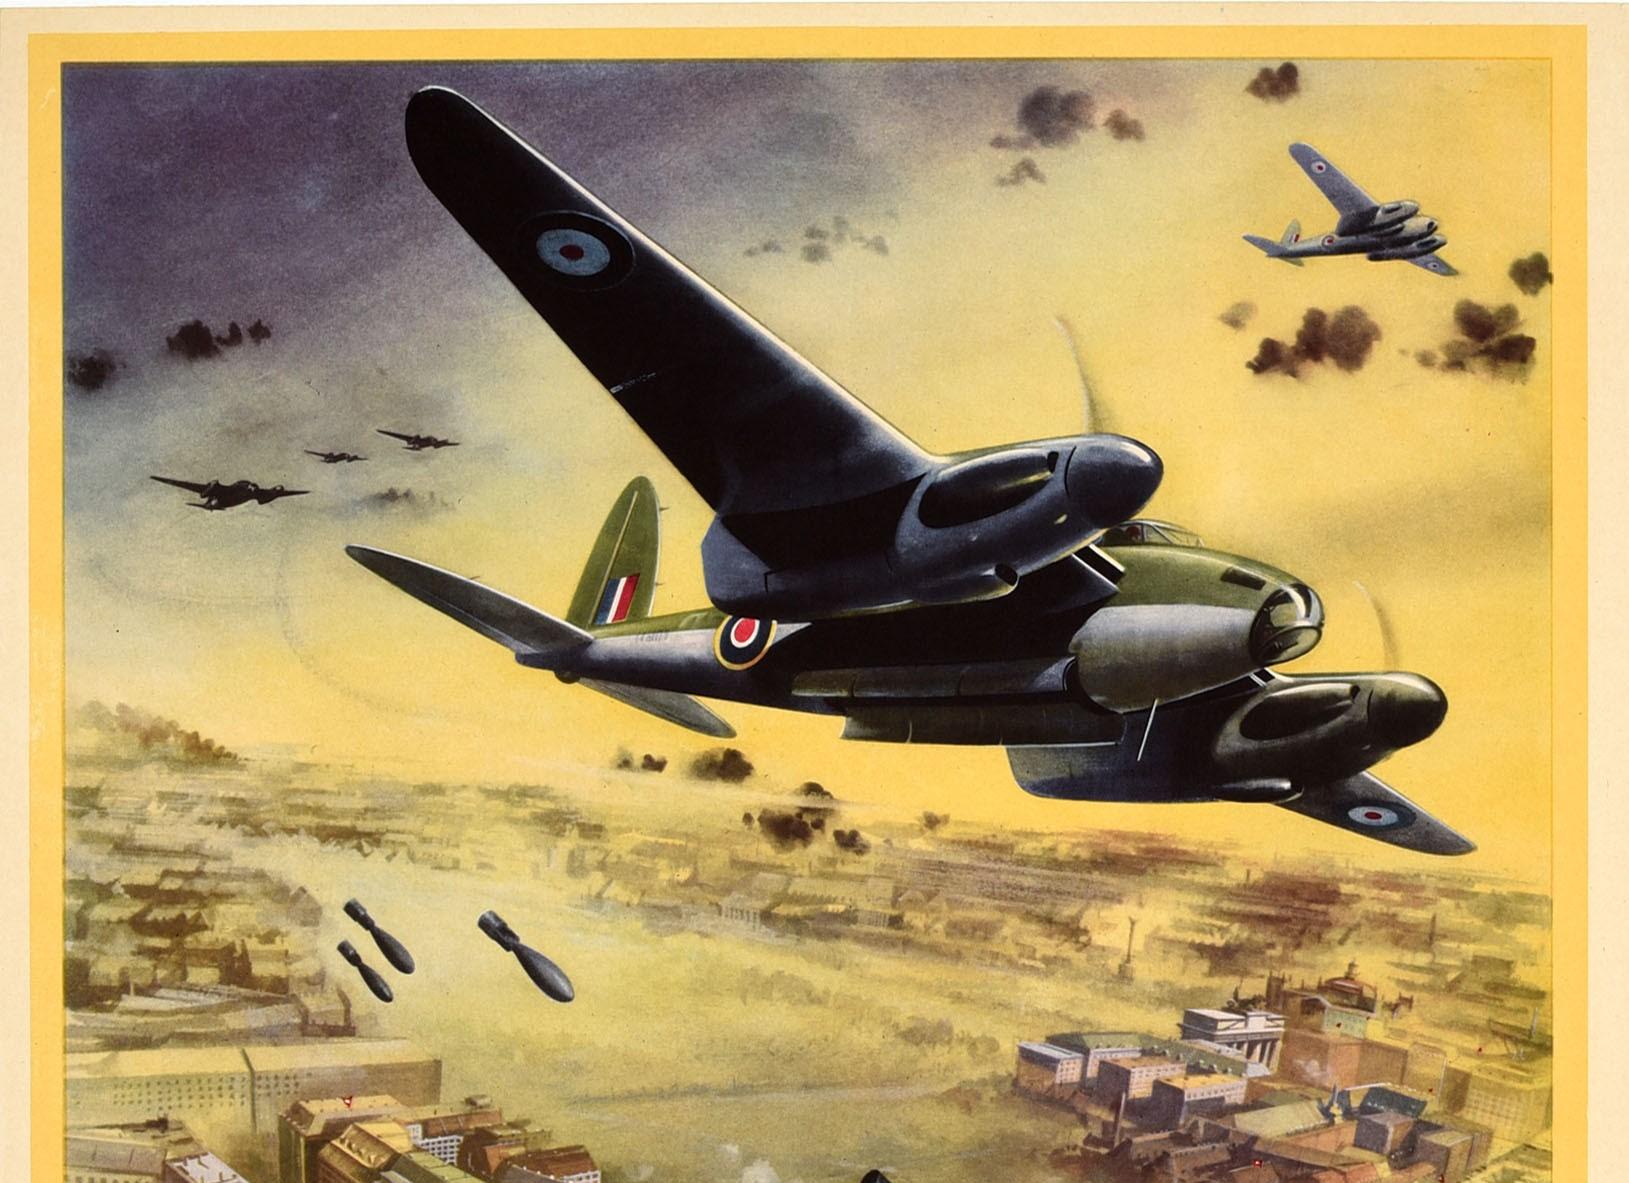 Original vintage World War Two propaganda poster entitled R.A.F day raiders over Berlin's official quarter The Downfall of the Dictators is Assured featuring dynamic artwork of British de Havilland Mosquito planes dropping bombs over Berlin in